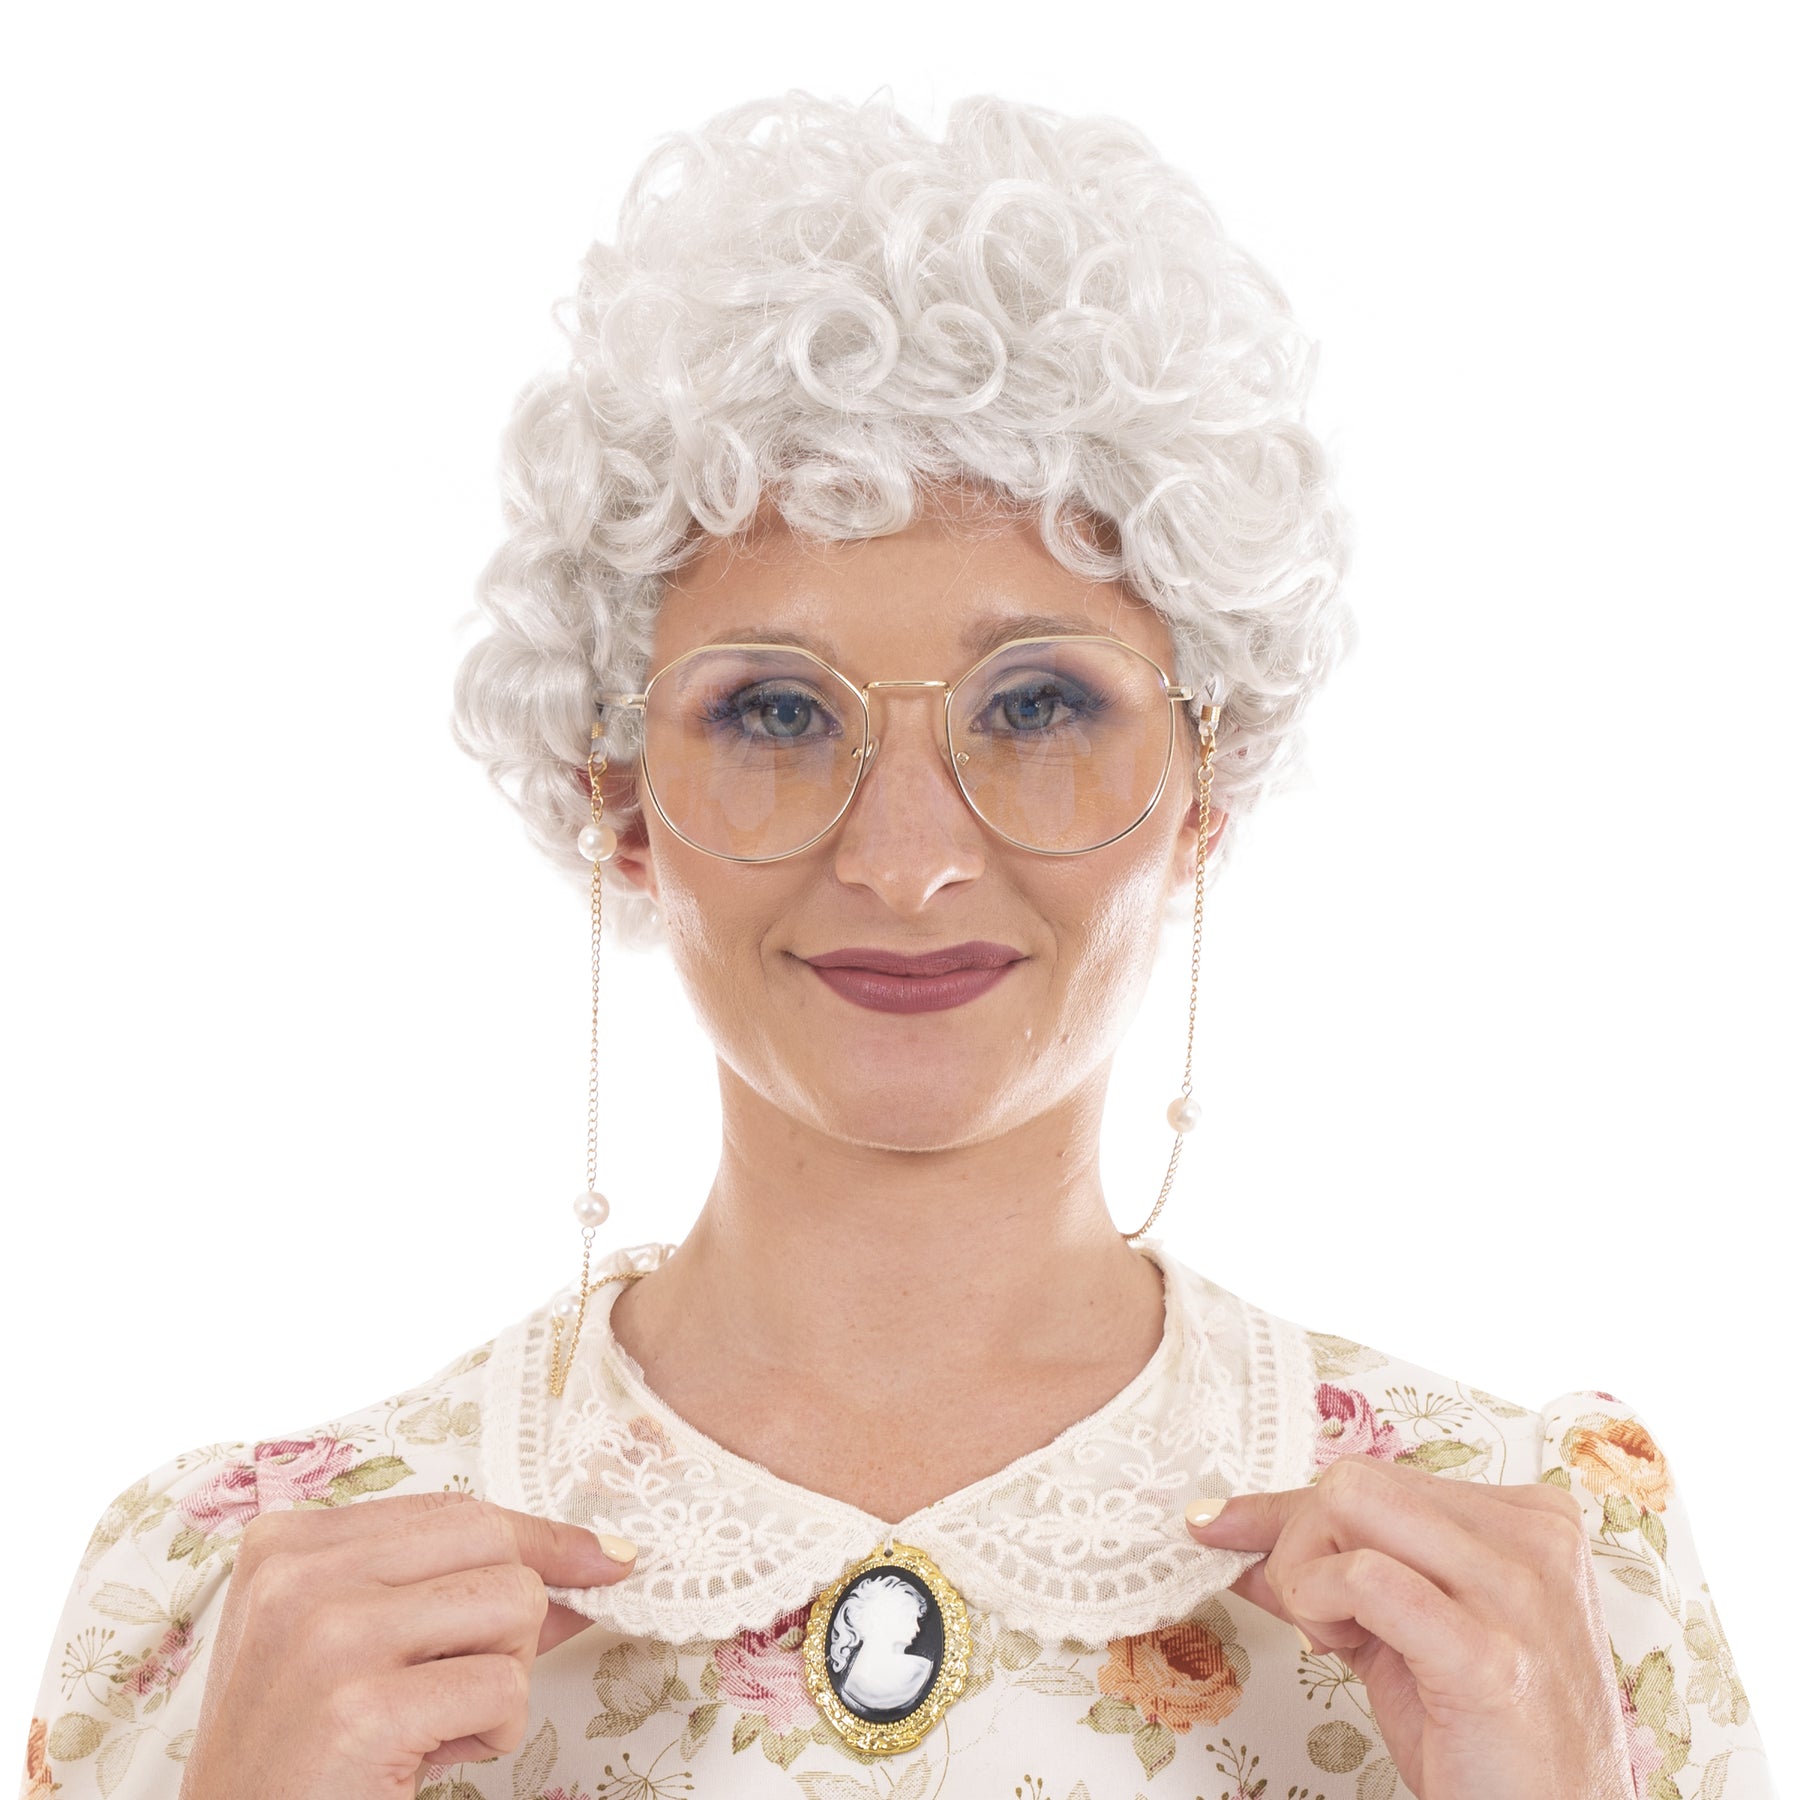 Golden Girls Complete Wig Set | Golden Girls Cosplay Wigs | Sized For Adults